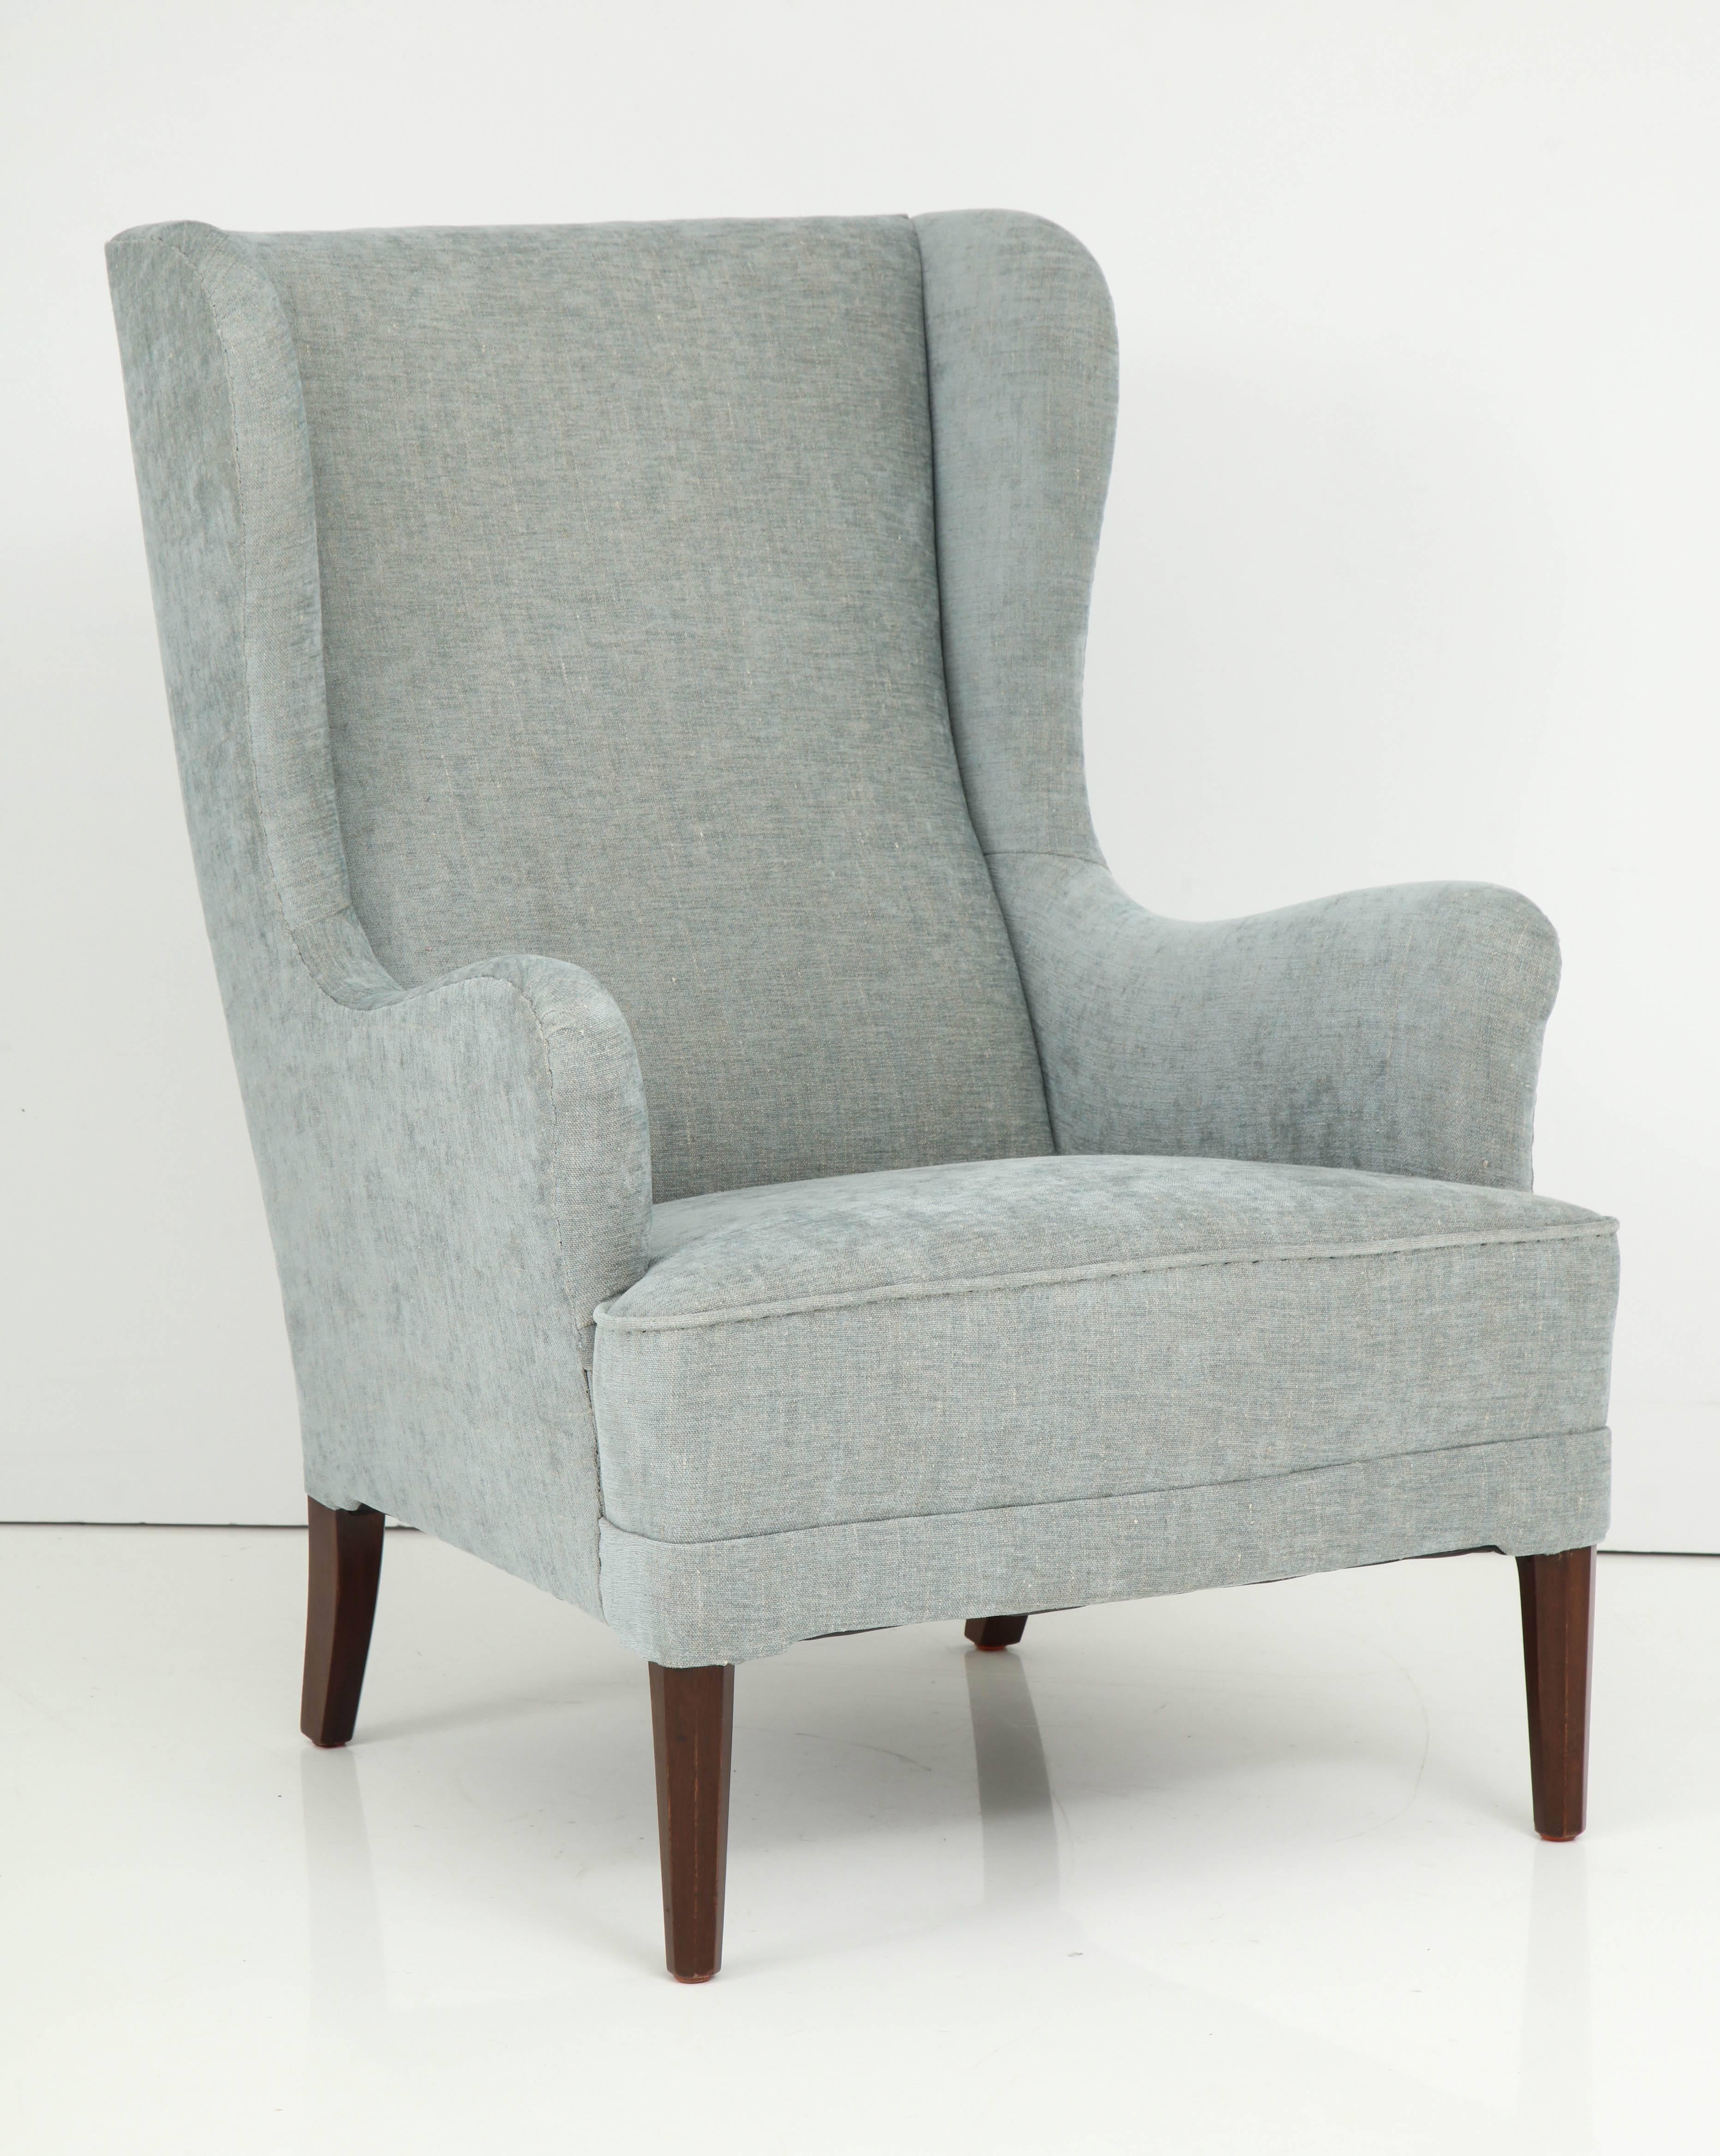 A Danish upholstered wingback armchair with stained beechwood legs and an associated footstool, circa 1940s. New upholstery

Measurements do not include footstool.